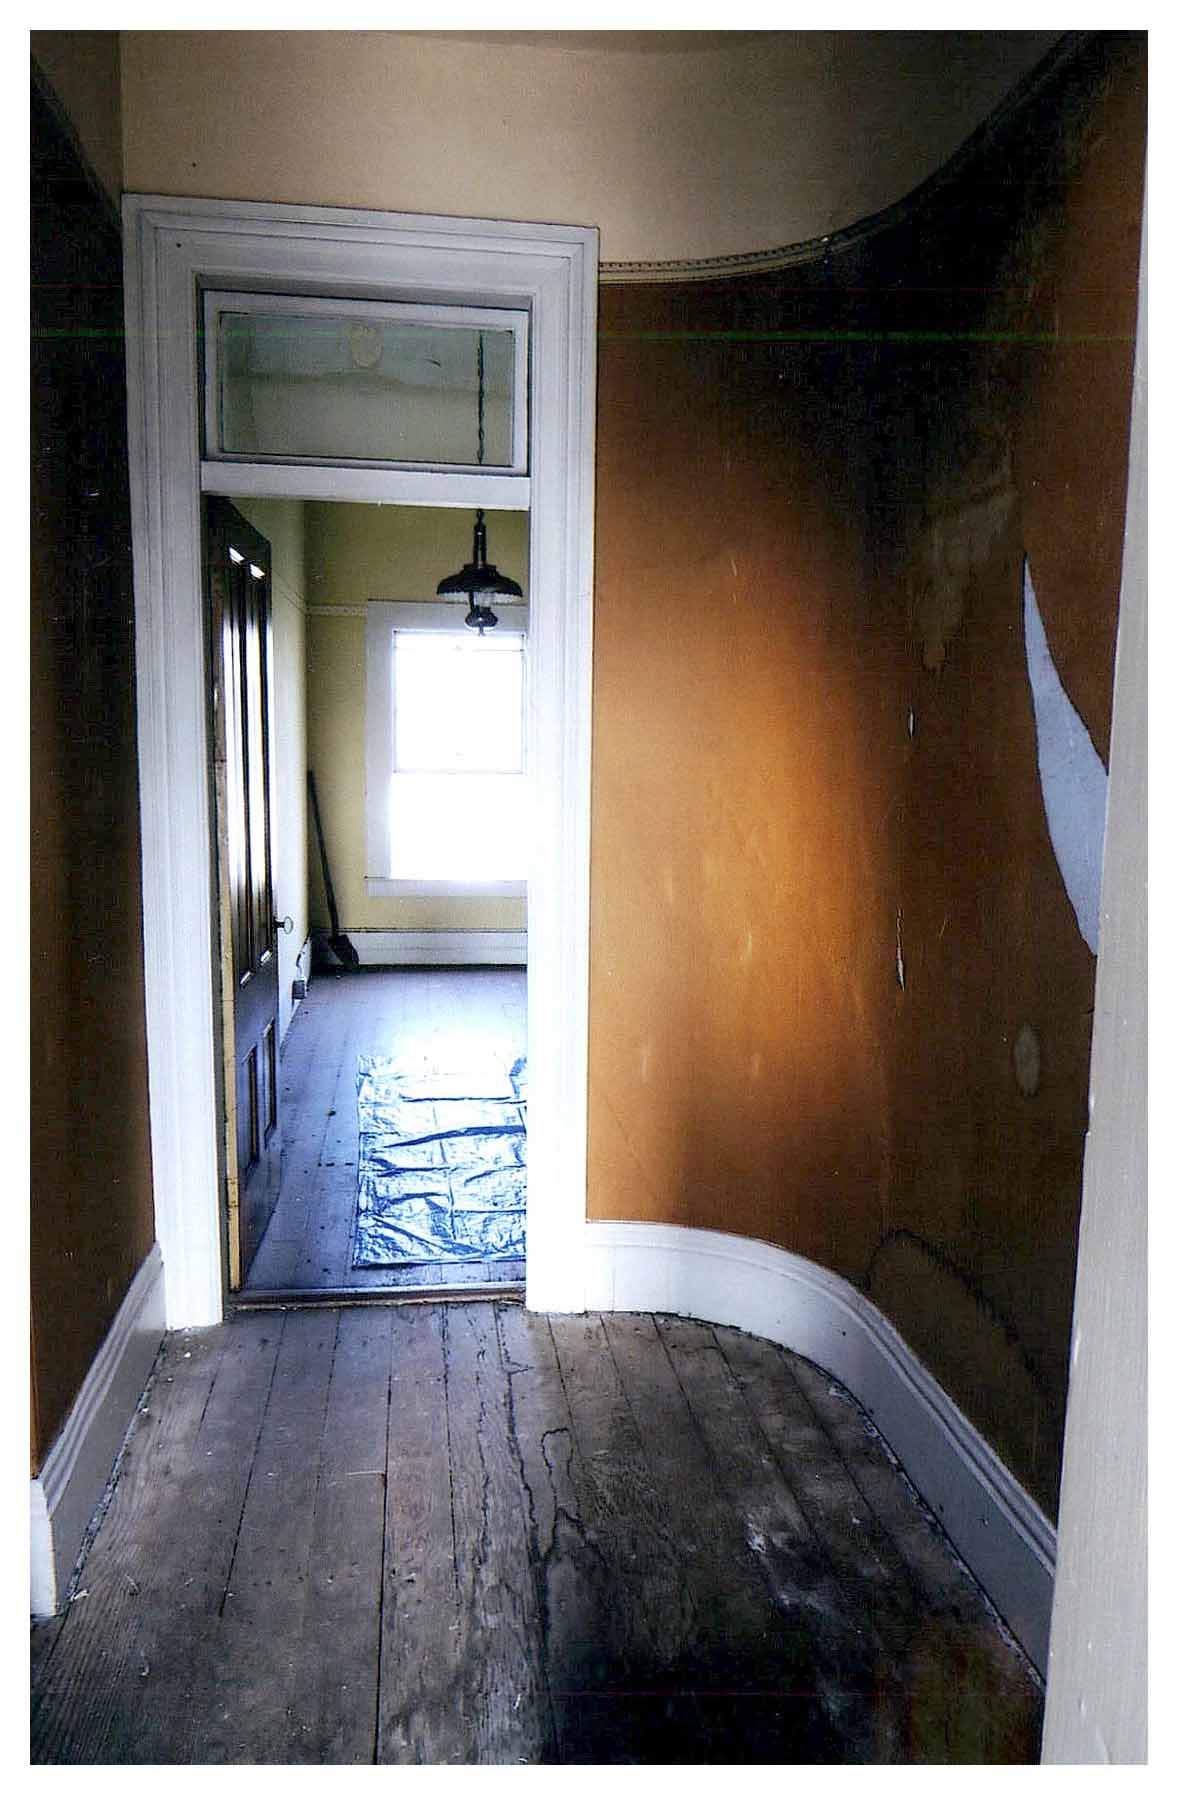 Before: same view of hallway and bedroom door with transom with unfinished wood floors and dark painted walls.